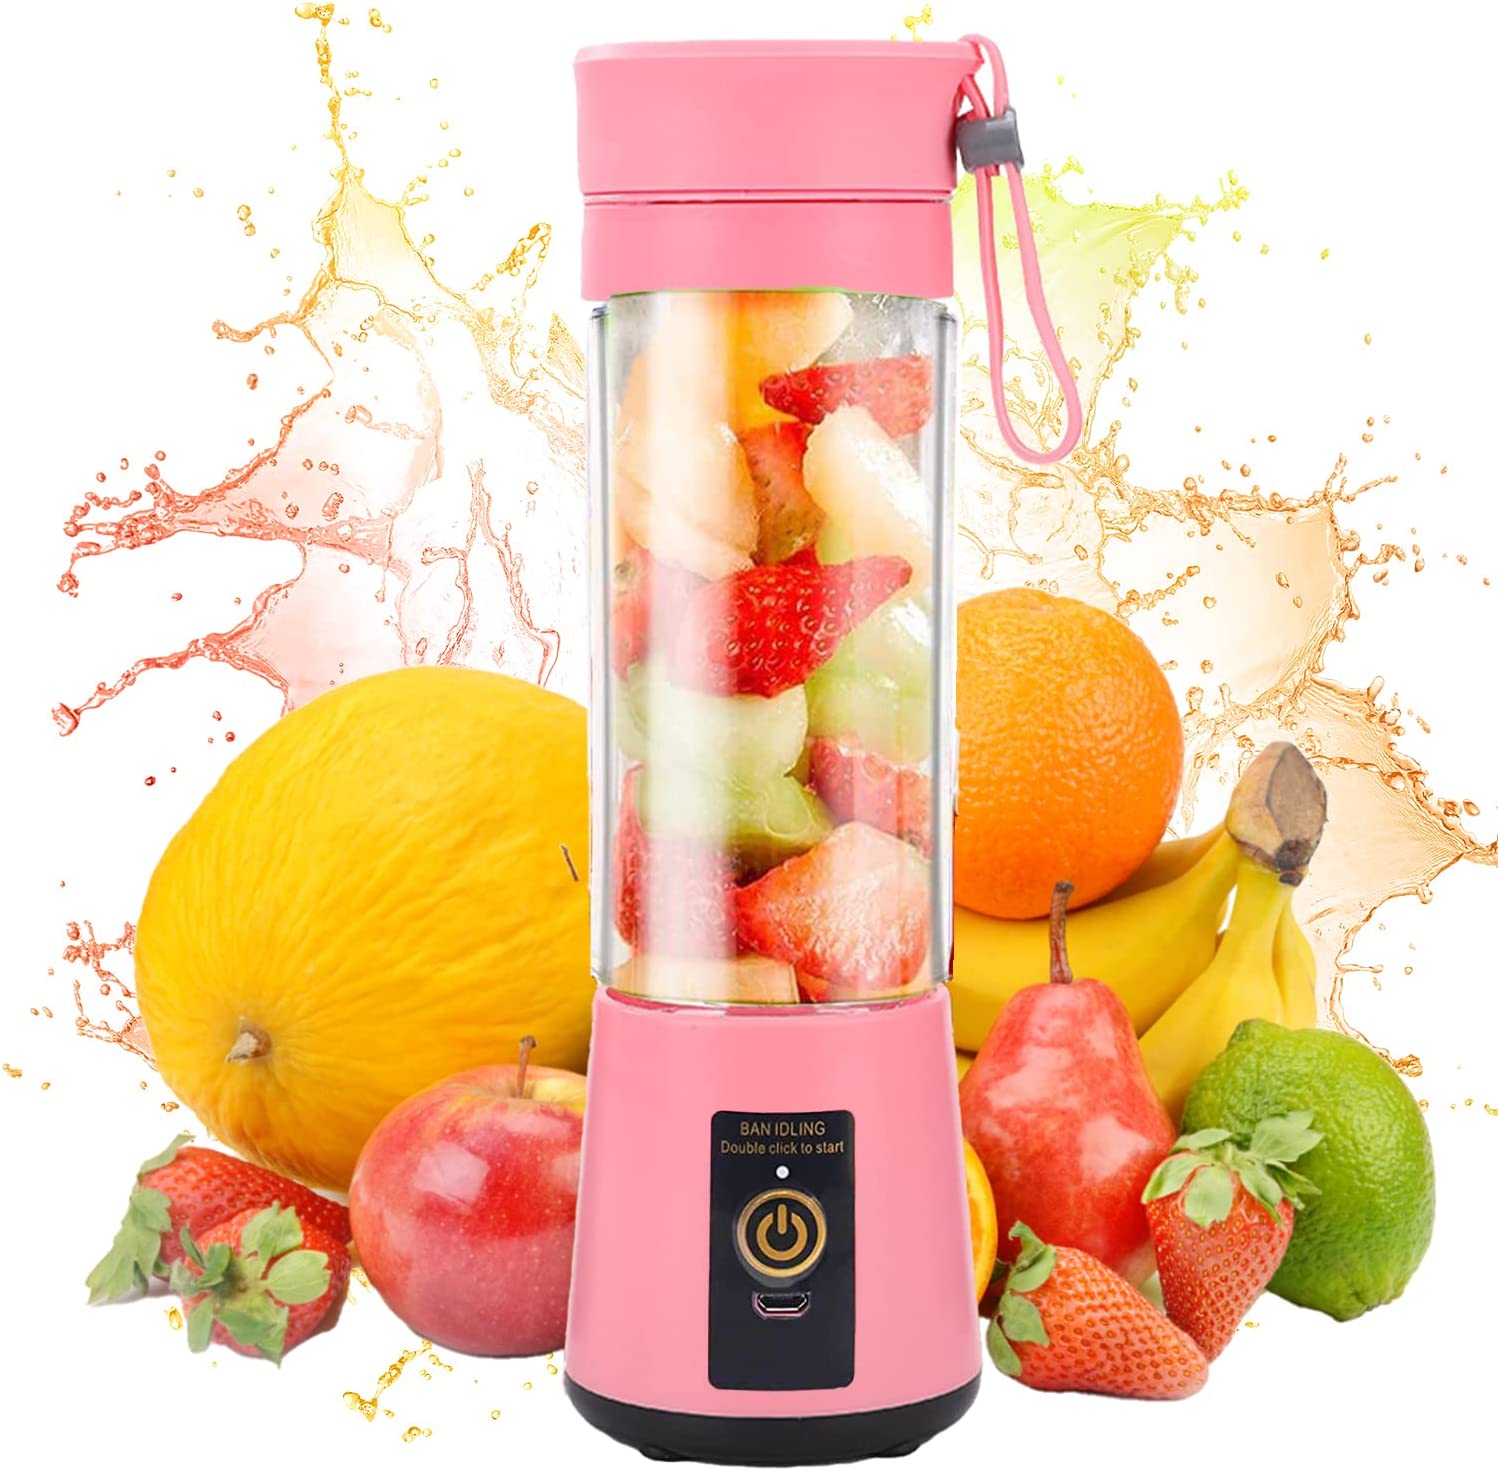 Portable Blender - Rechargeable 6 Sheet Blender Cup | Travel Blender for Fresh Juice Shakes and Smoothies | For Home, Sports, Outdoor, Travel (Pink)